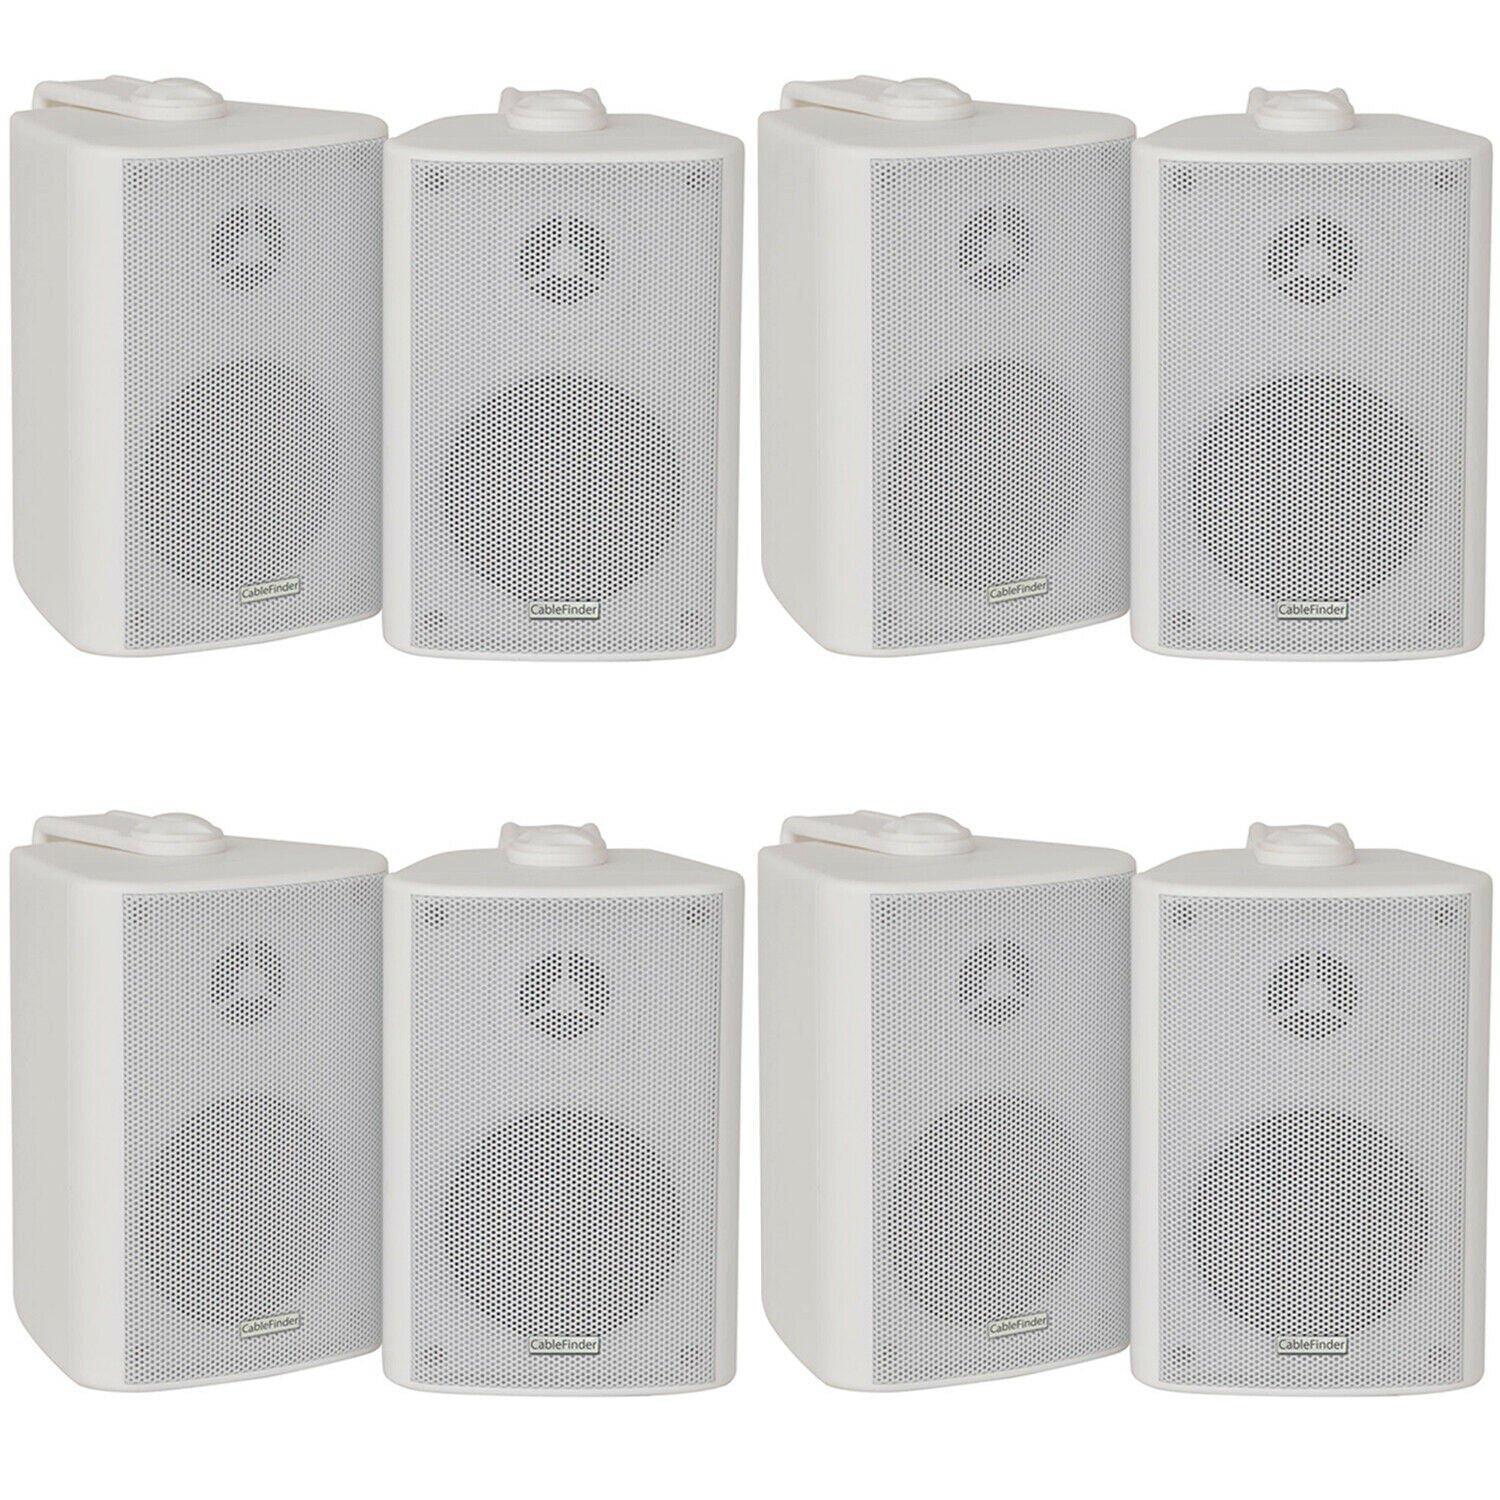 8x 60W 2 Way White Wall Mounted Stereo Speakers 3